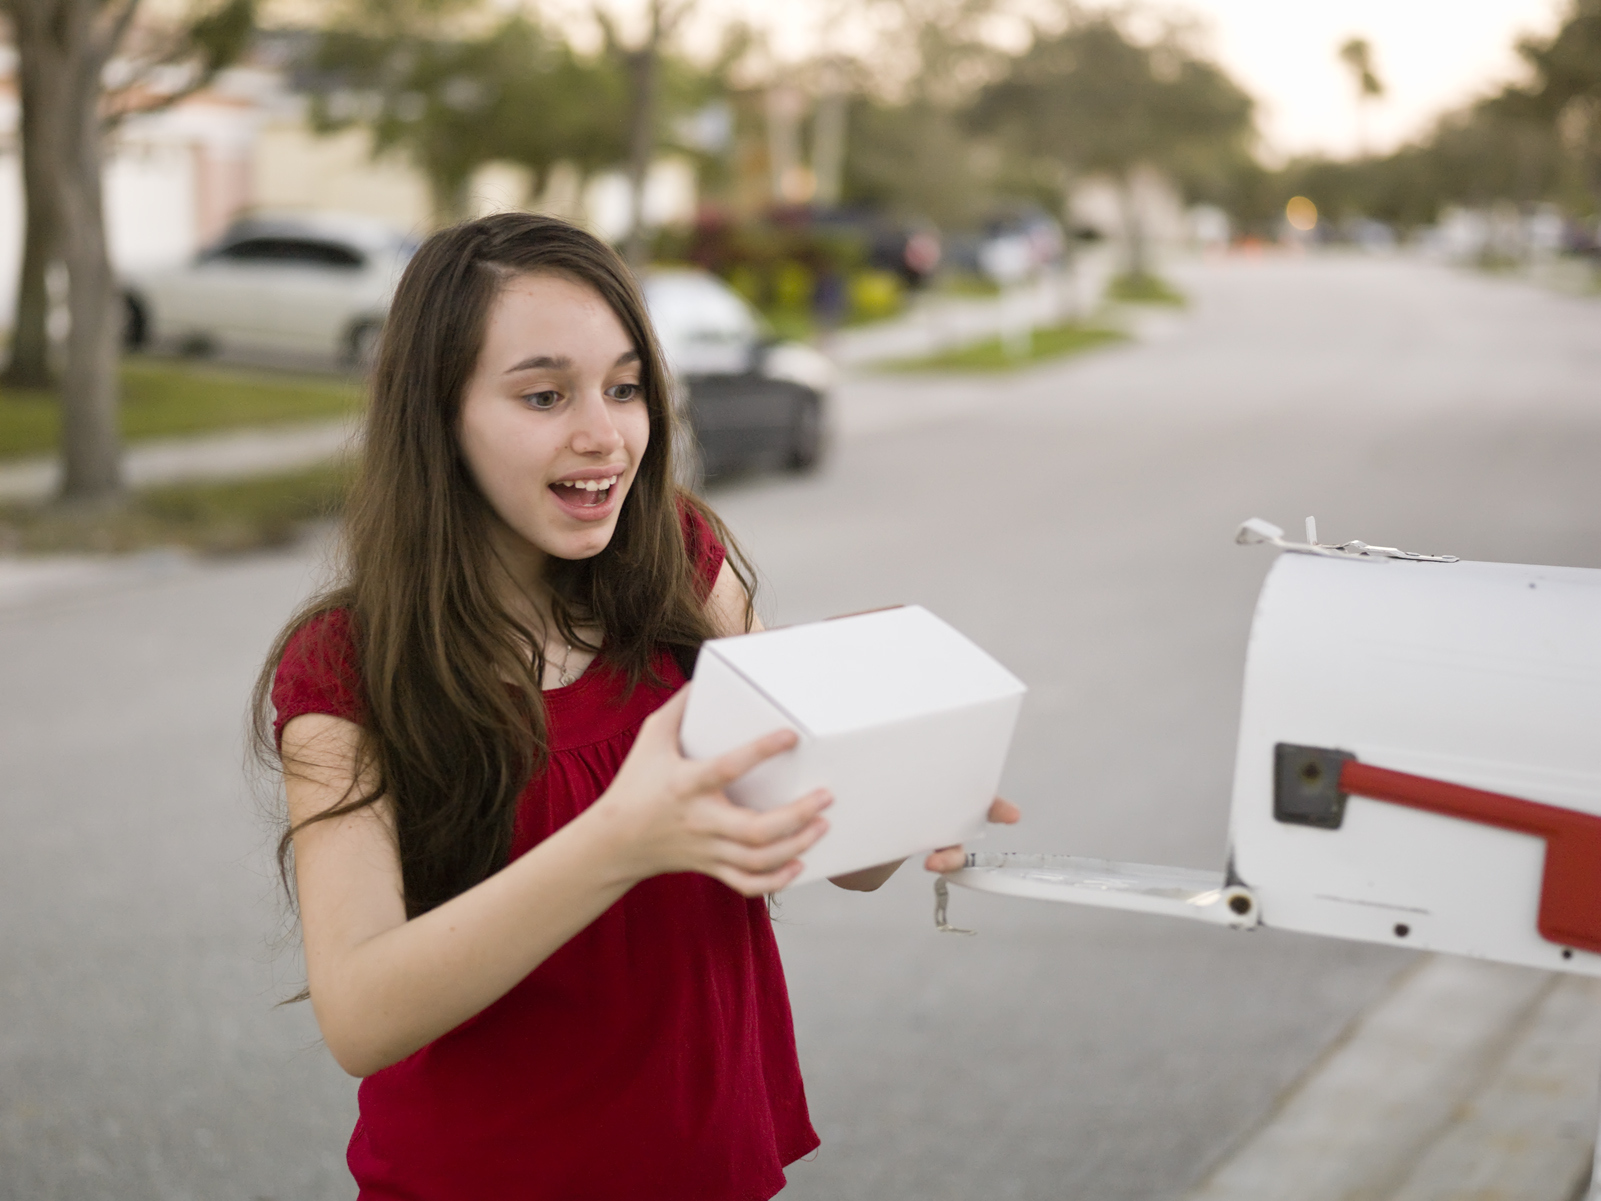 a young girl takes a package out of a mailbox with an expression of excitement